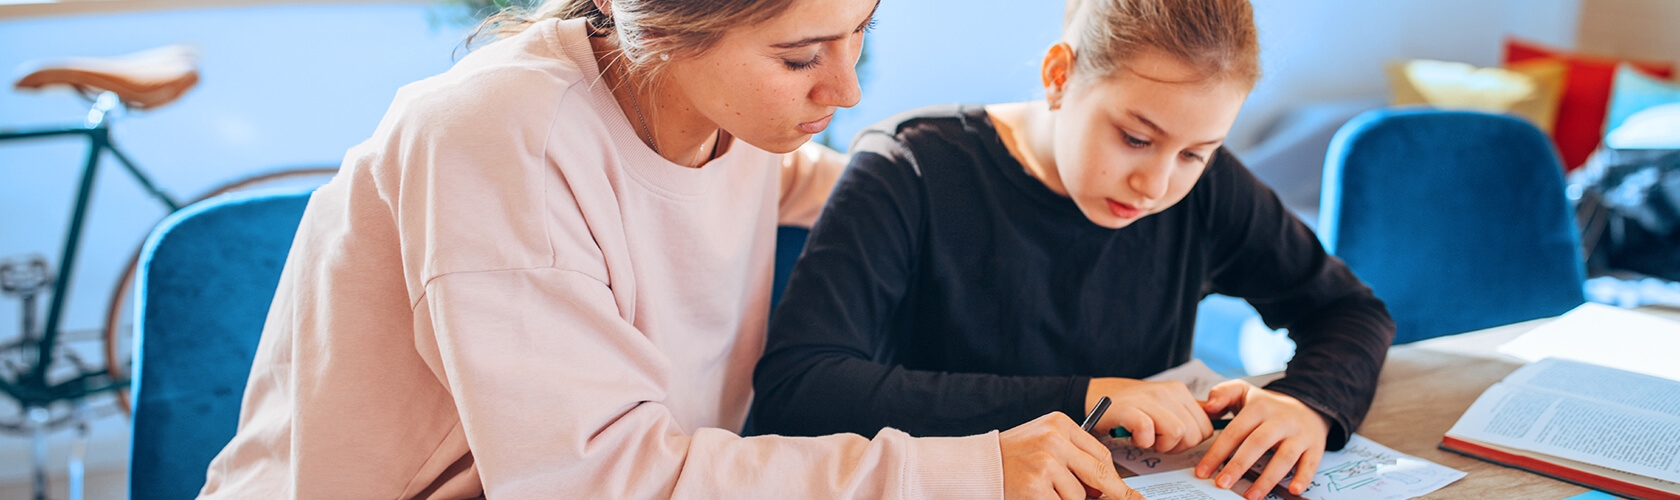 A mother and daughter work on homework